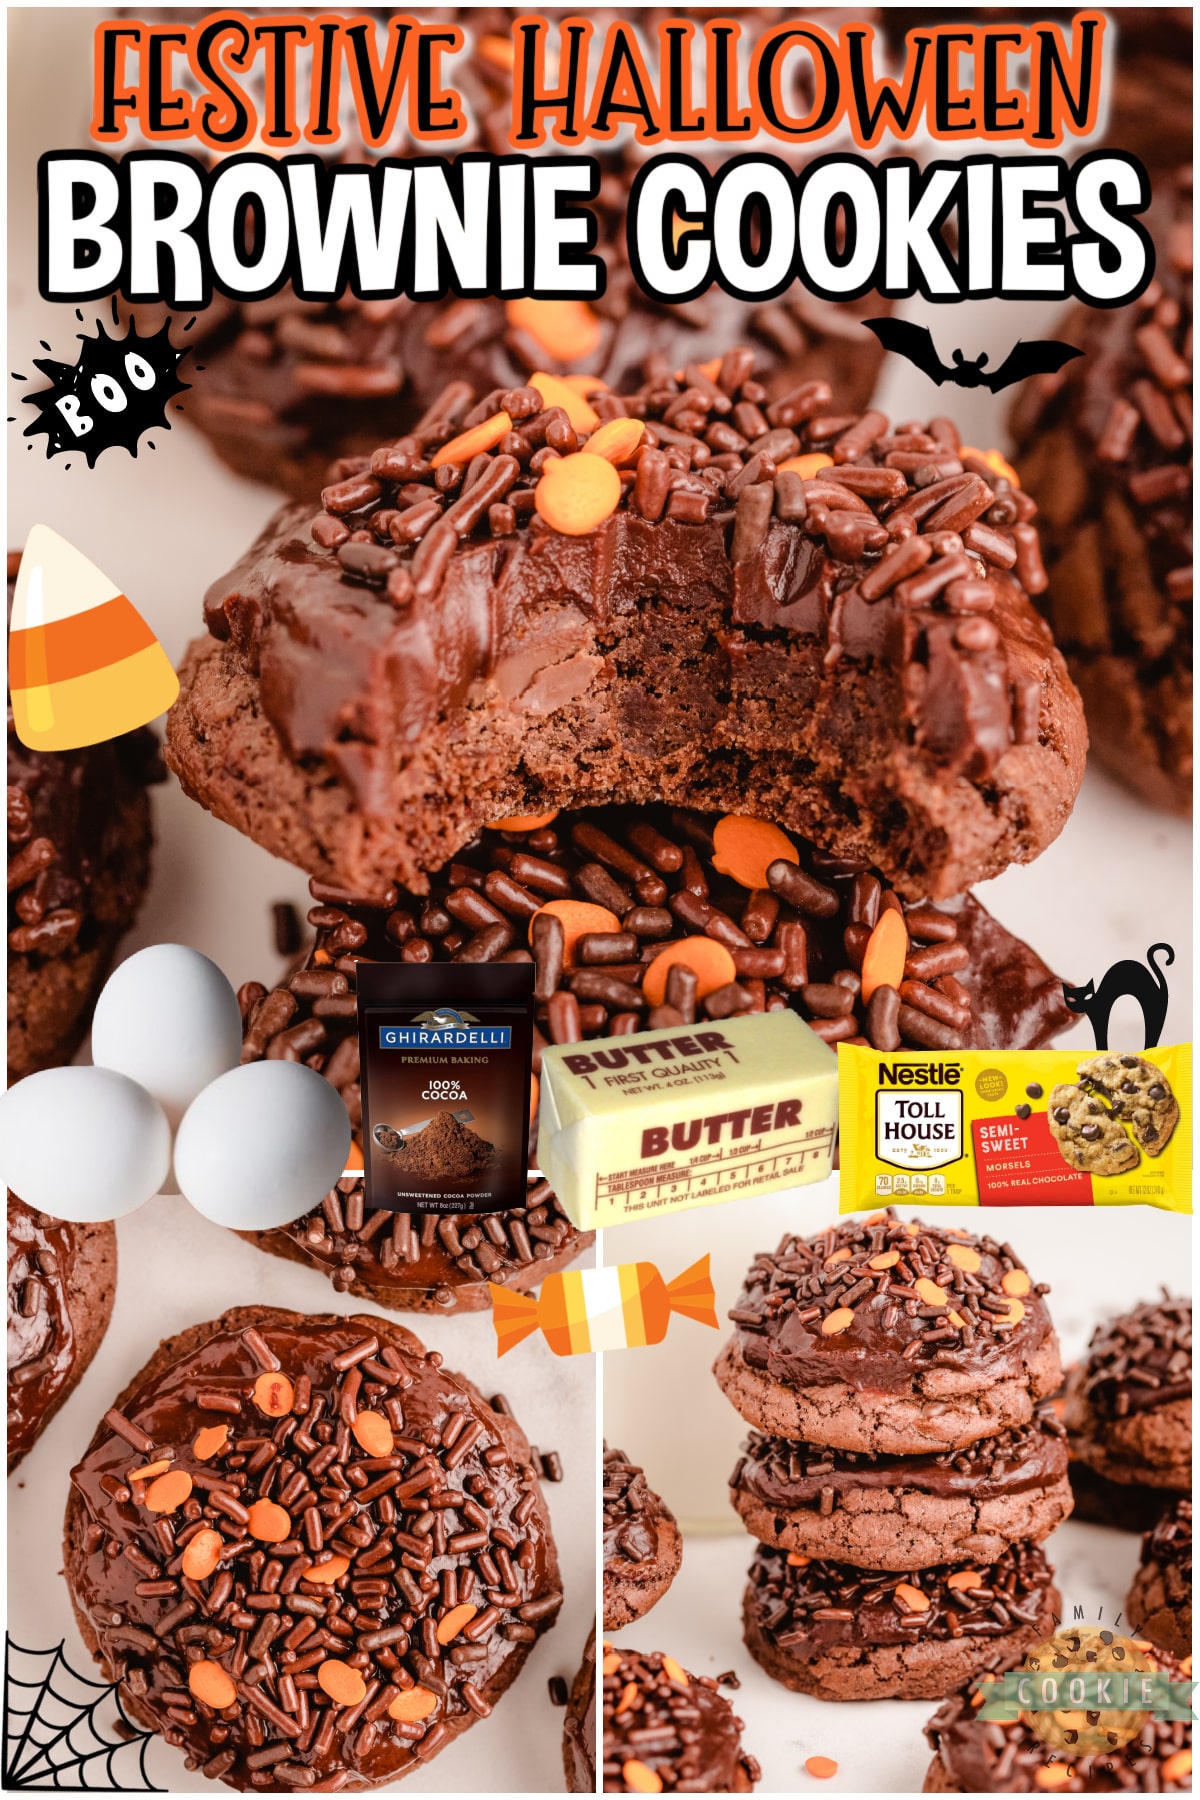 Halloween Brownie Cookies are everything you love about brownies, in cookie form! Soft & chewy with a decadent chocolate icing, these festive cookies are perfect for chocolate lovers!